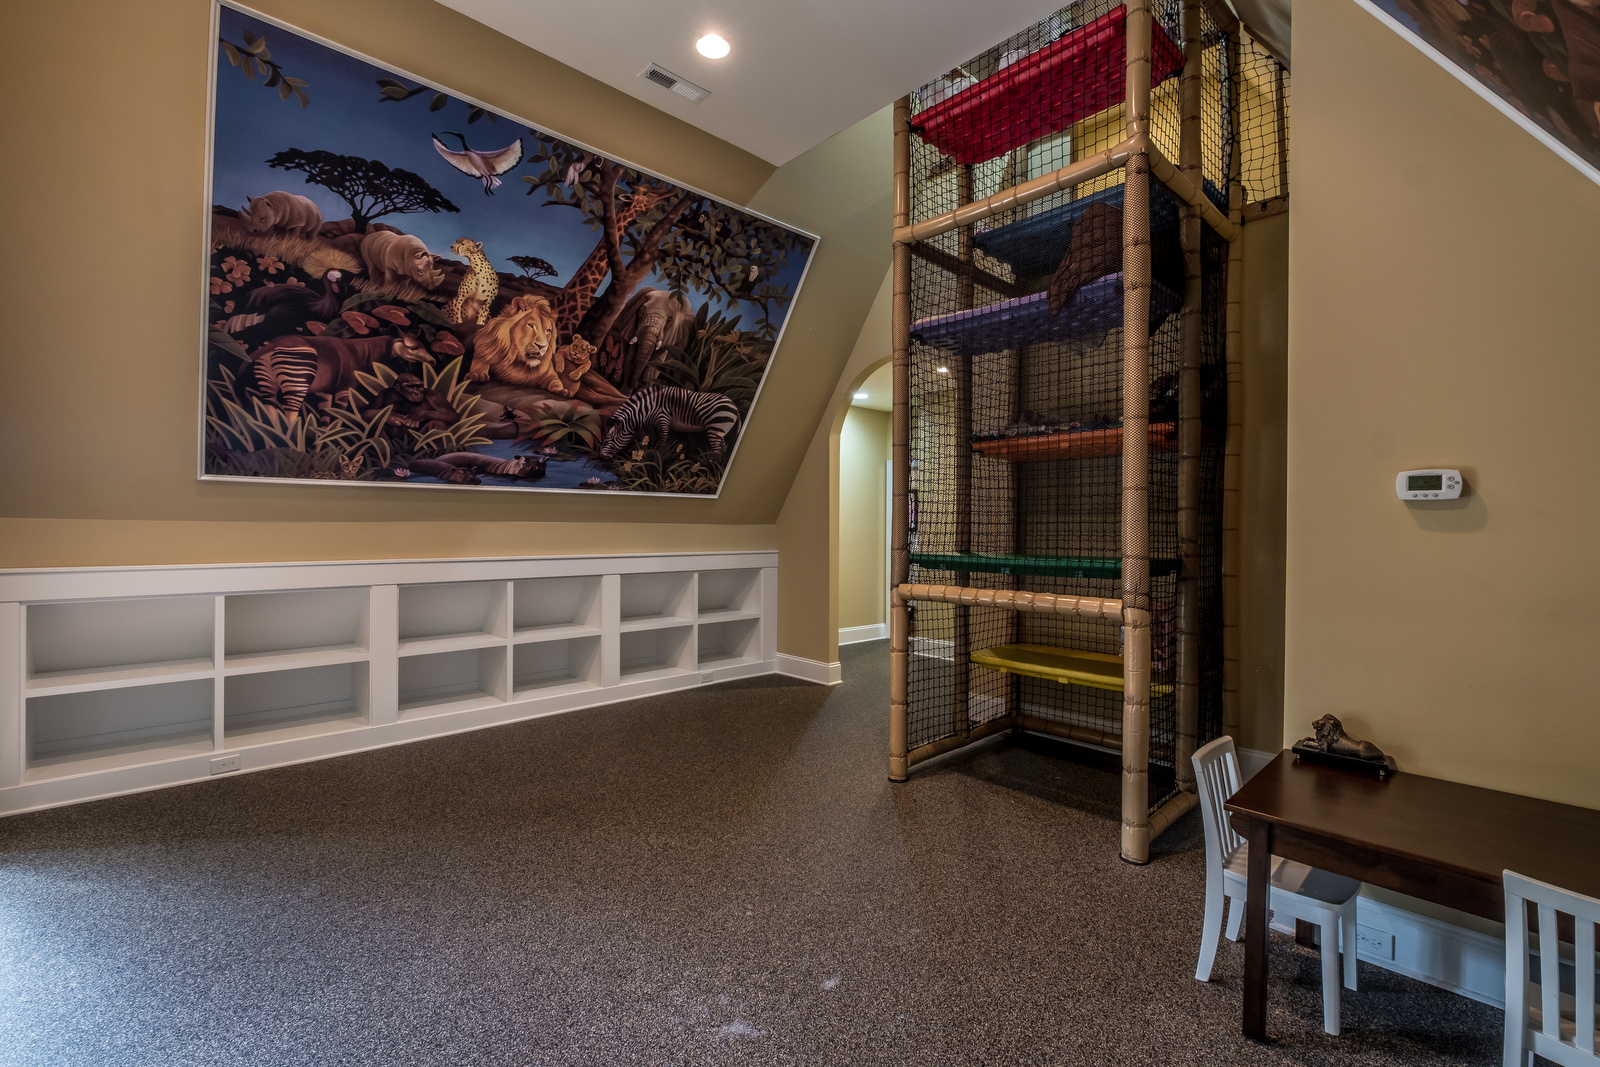 Playroom with mat floor light brown walls built in white cubbies huge animal mural on the wall large play climbing area